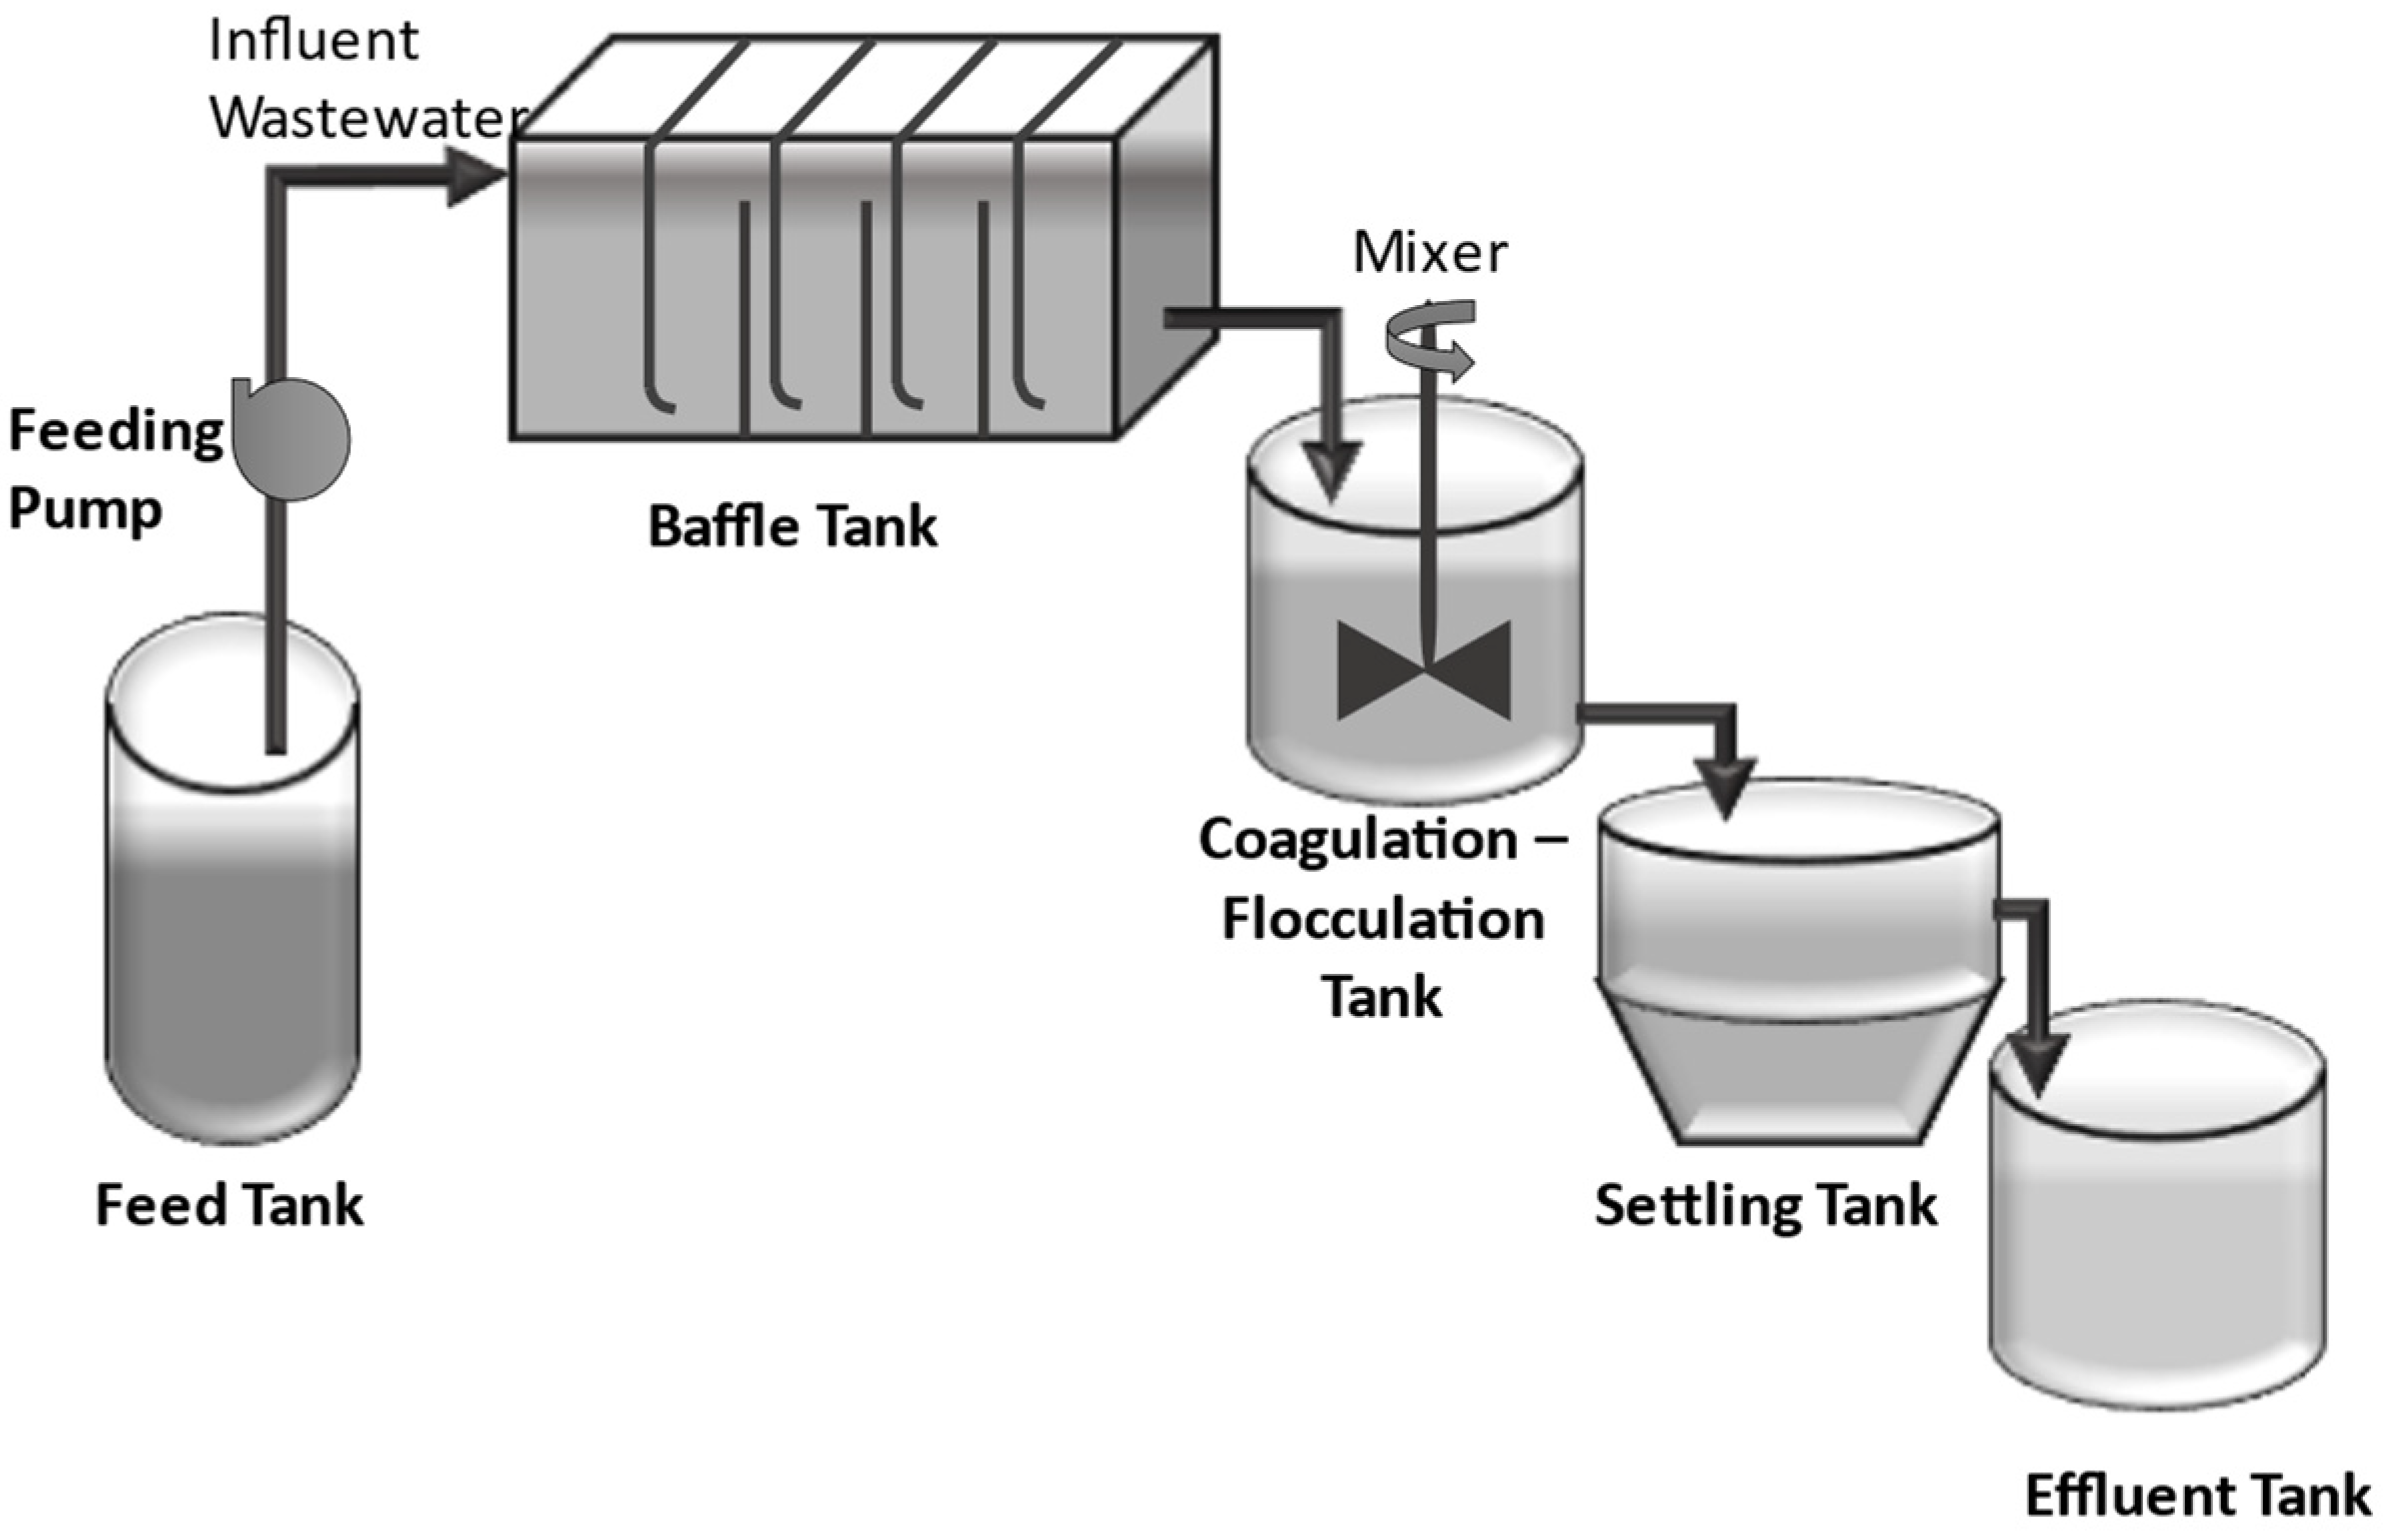 Schematic diagram for the treatment of greywater